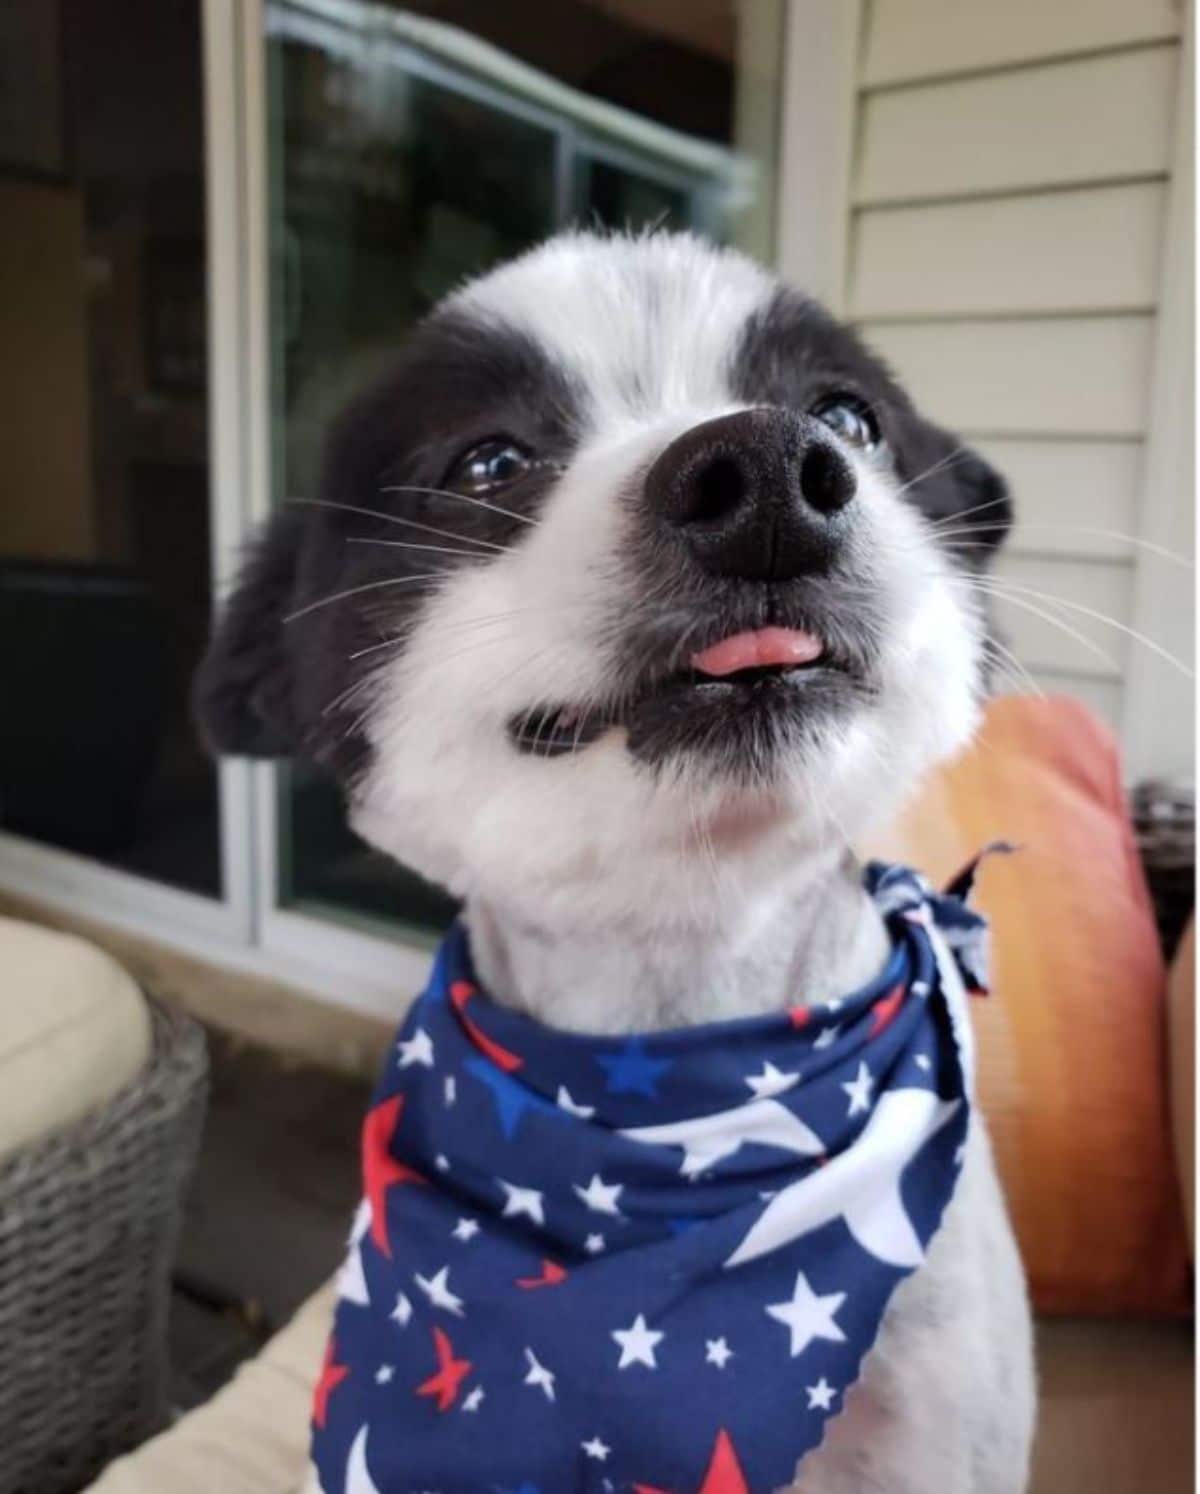 black and white dog with the tongue sticking out slightly wearing a blue bandana with red and white stars